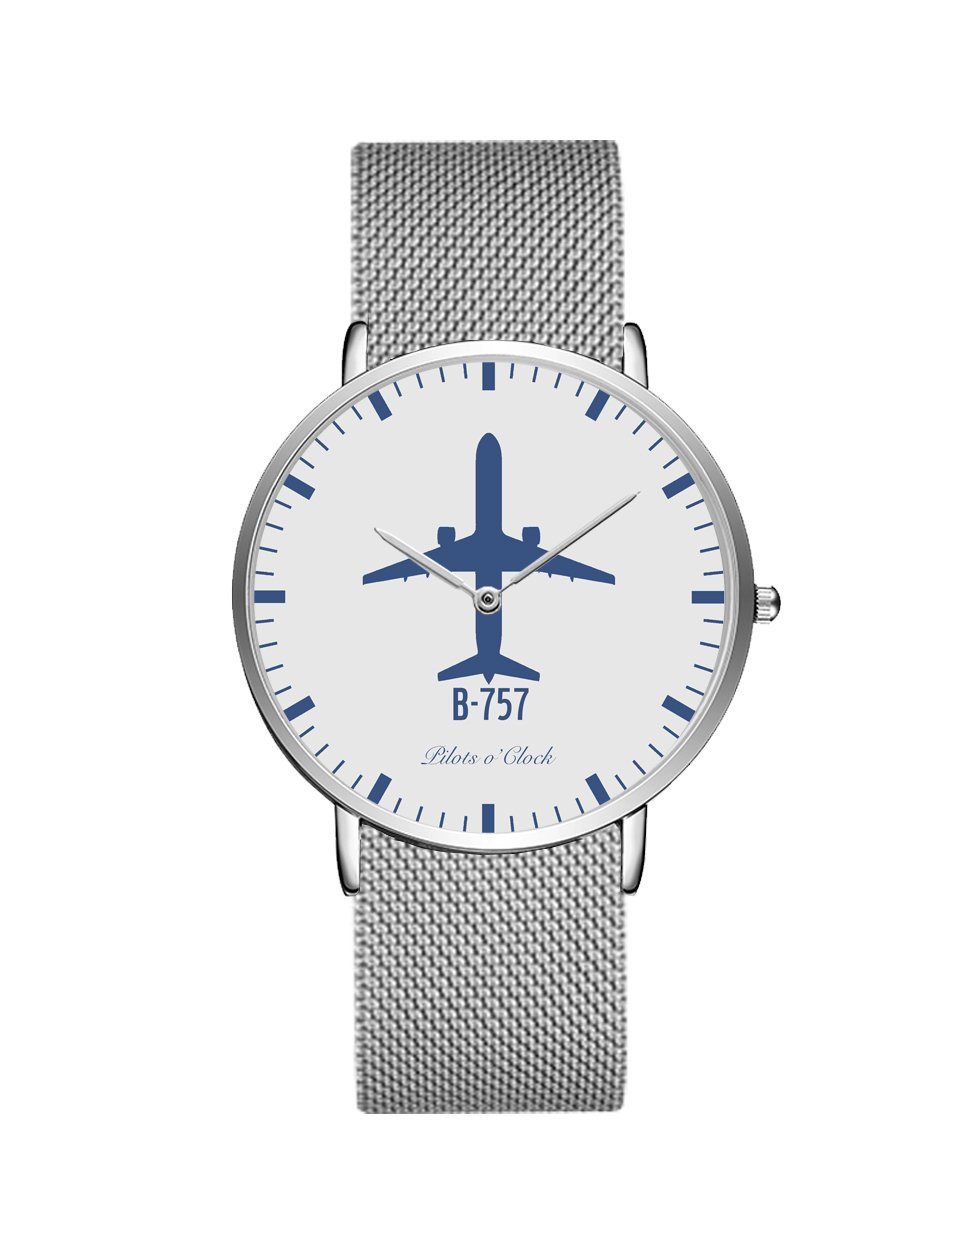 Boeing 757 Stainless Steel Strap Watches Pilot Eyes Store Silver & Silver Stainless Steel Strap 